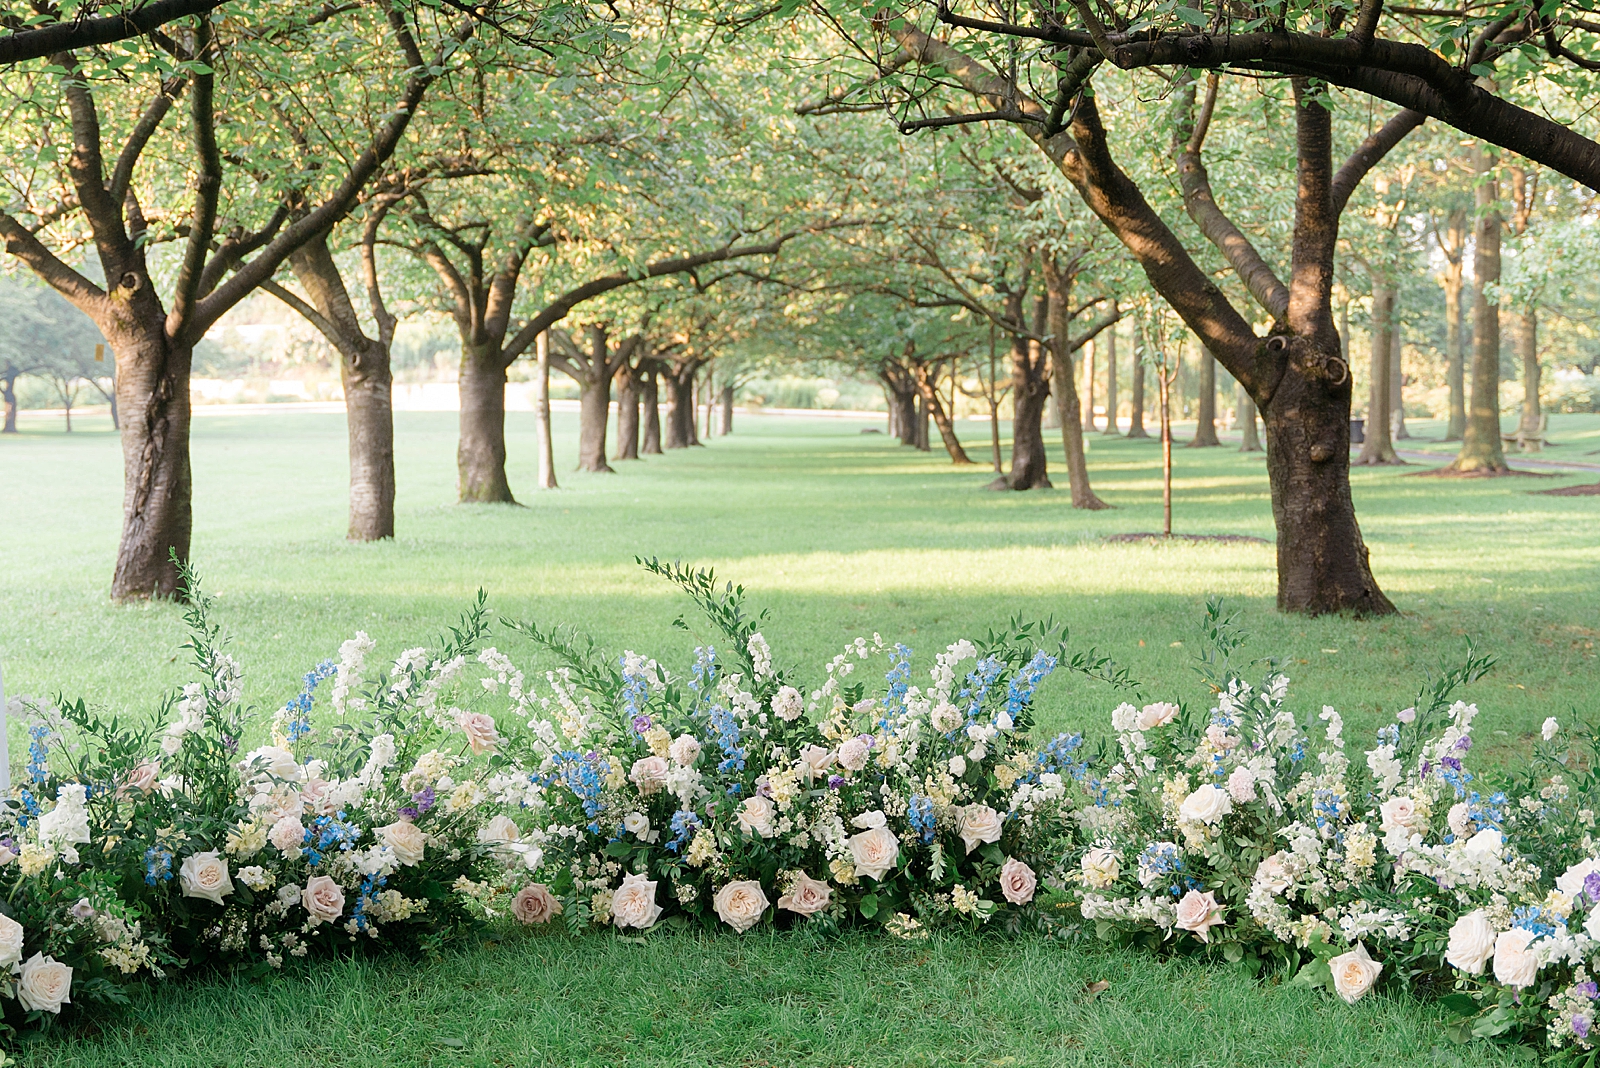 Shot of floral arrangements before two rows of trees.